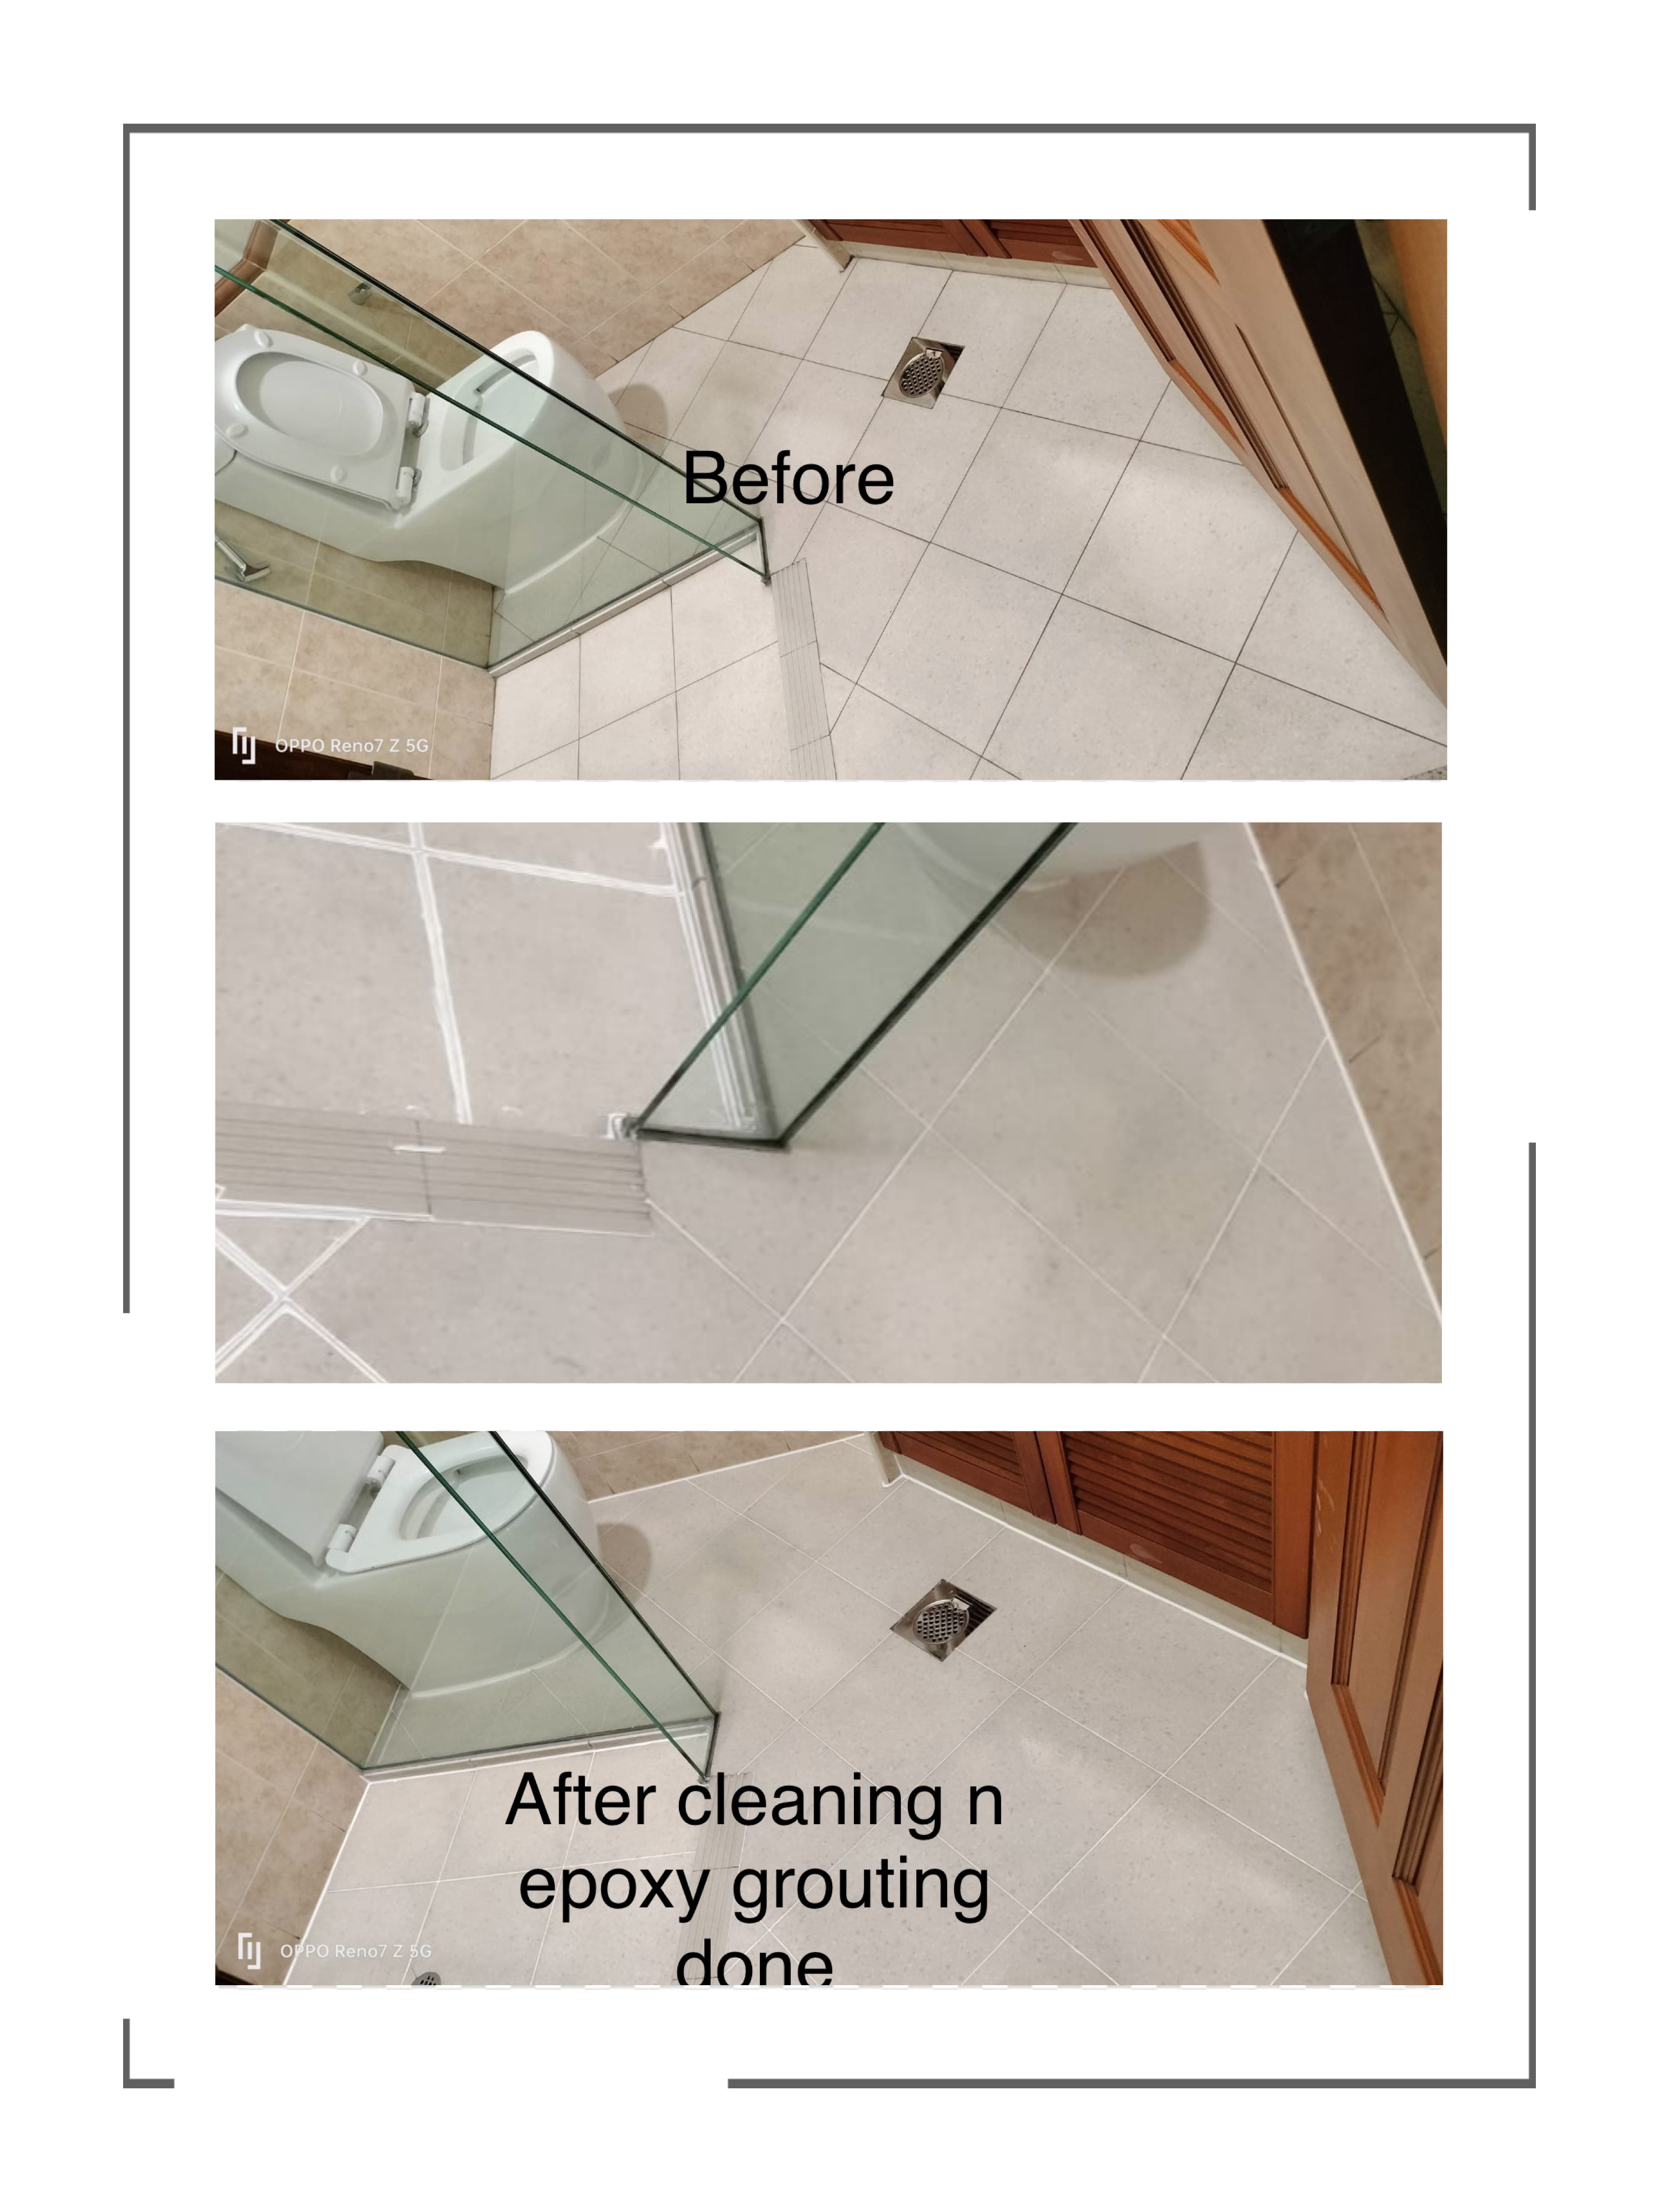 Epoxy Grouting Installation and Repair Service in Singapore